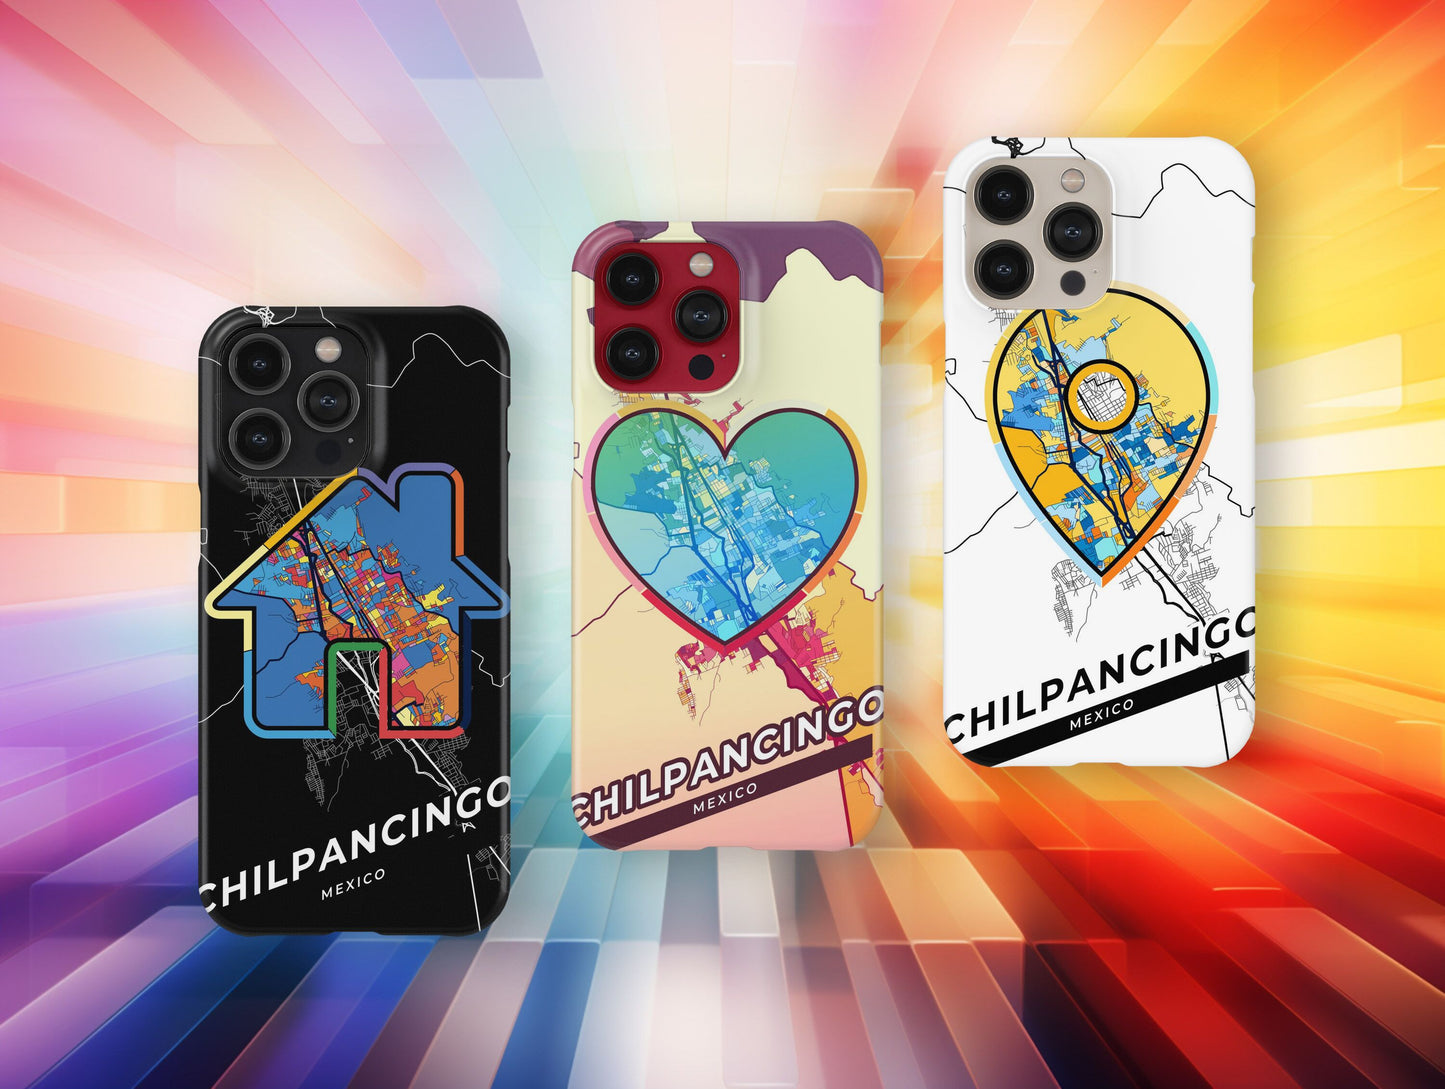 Chilpancingo Mexico slim phone case with colorful icon. Birthday, wedding or housewarming gift. Couple match cases.